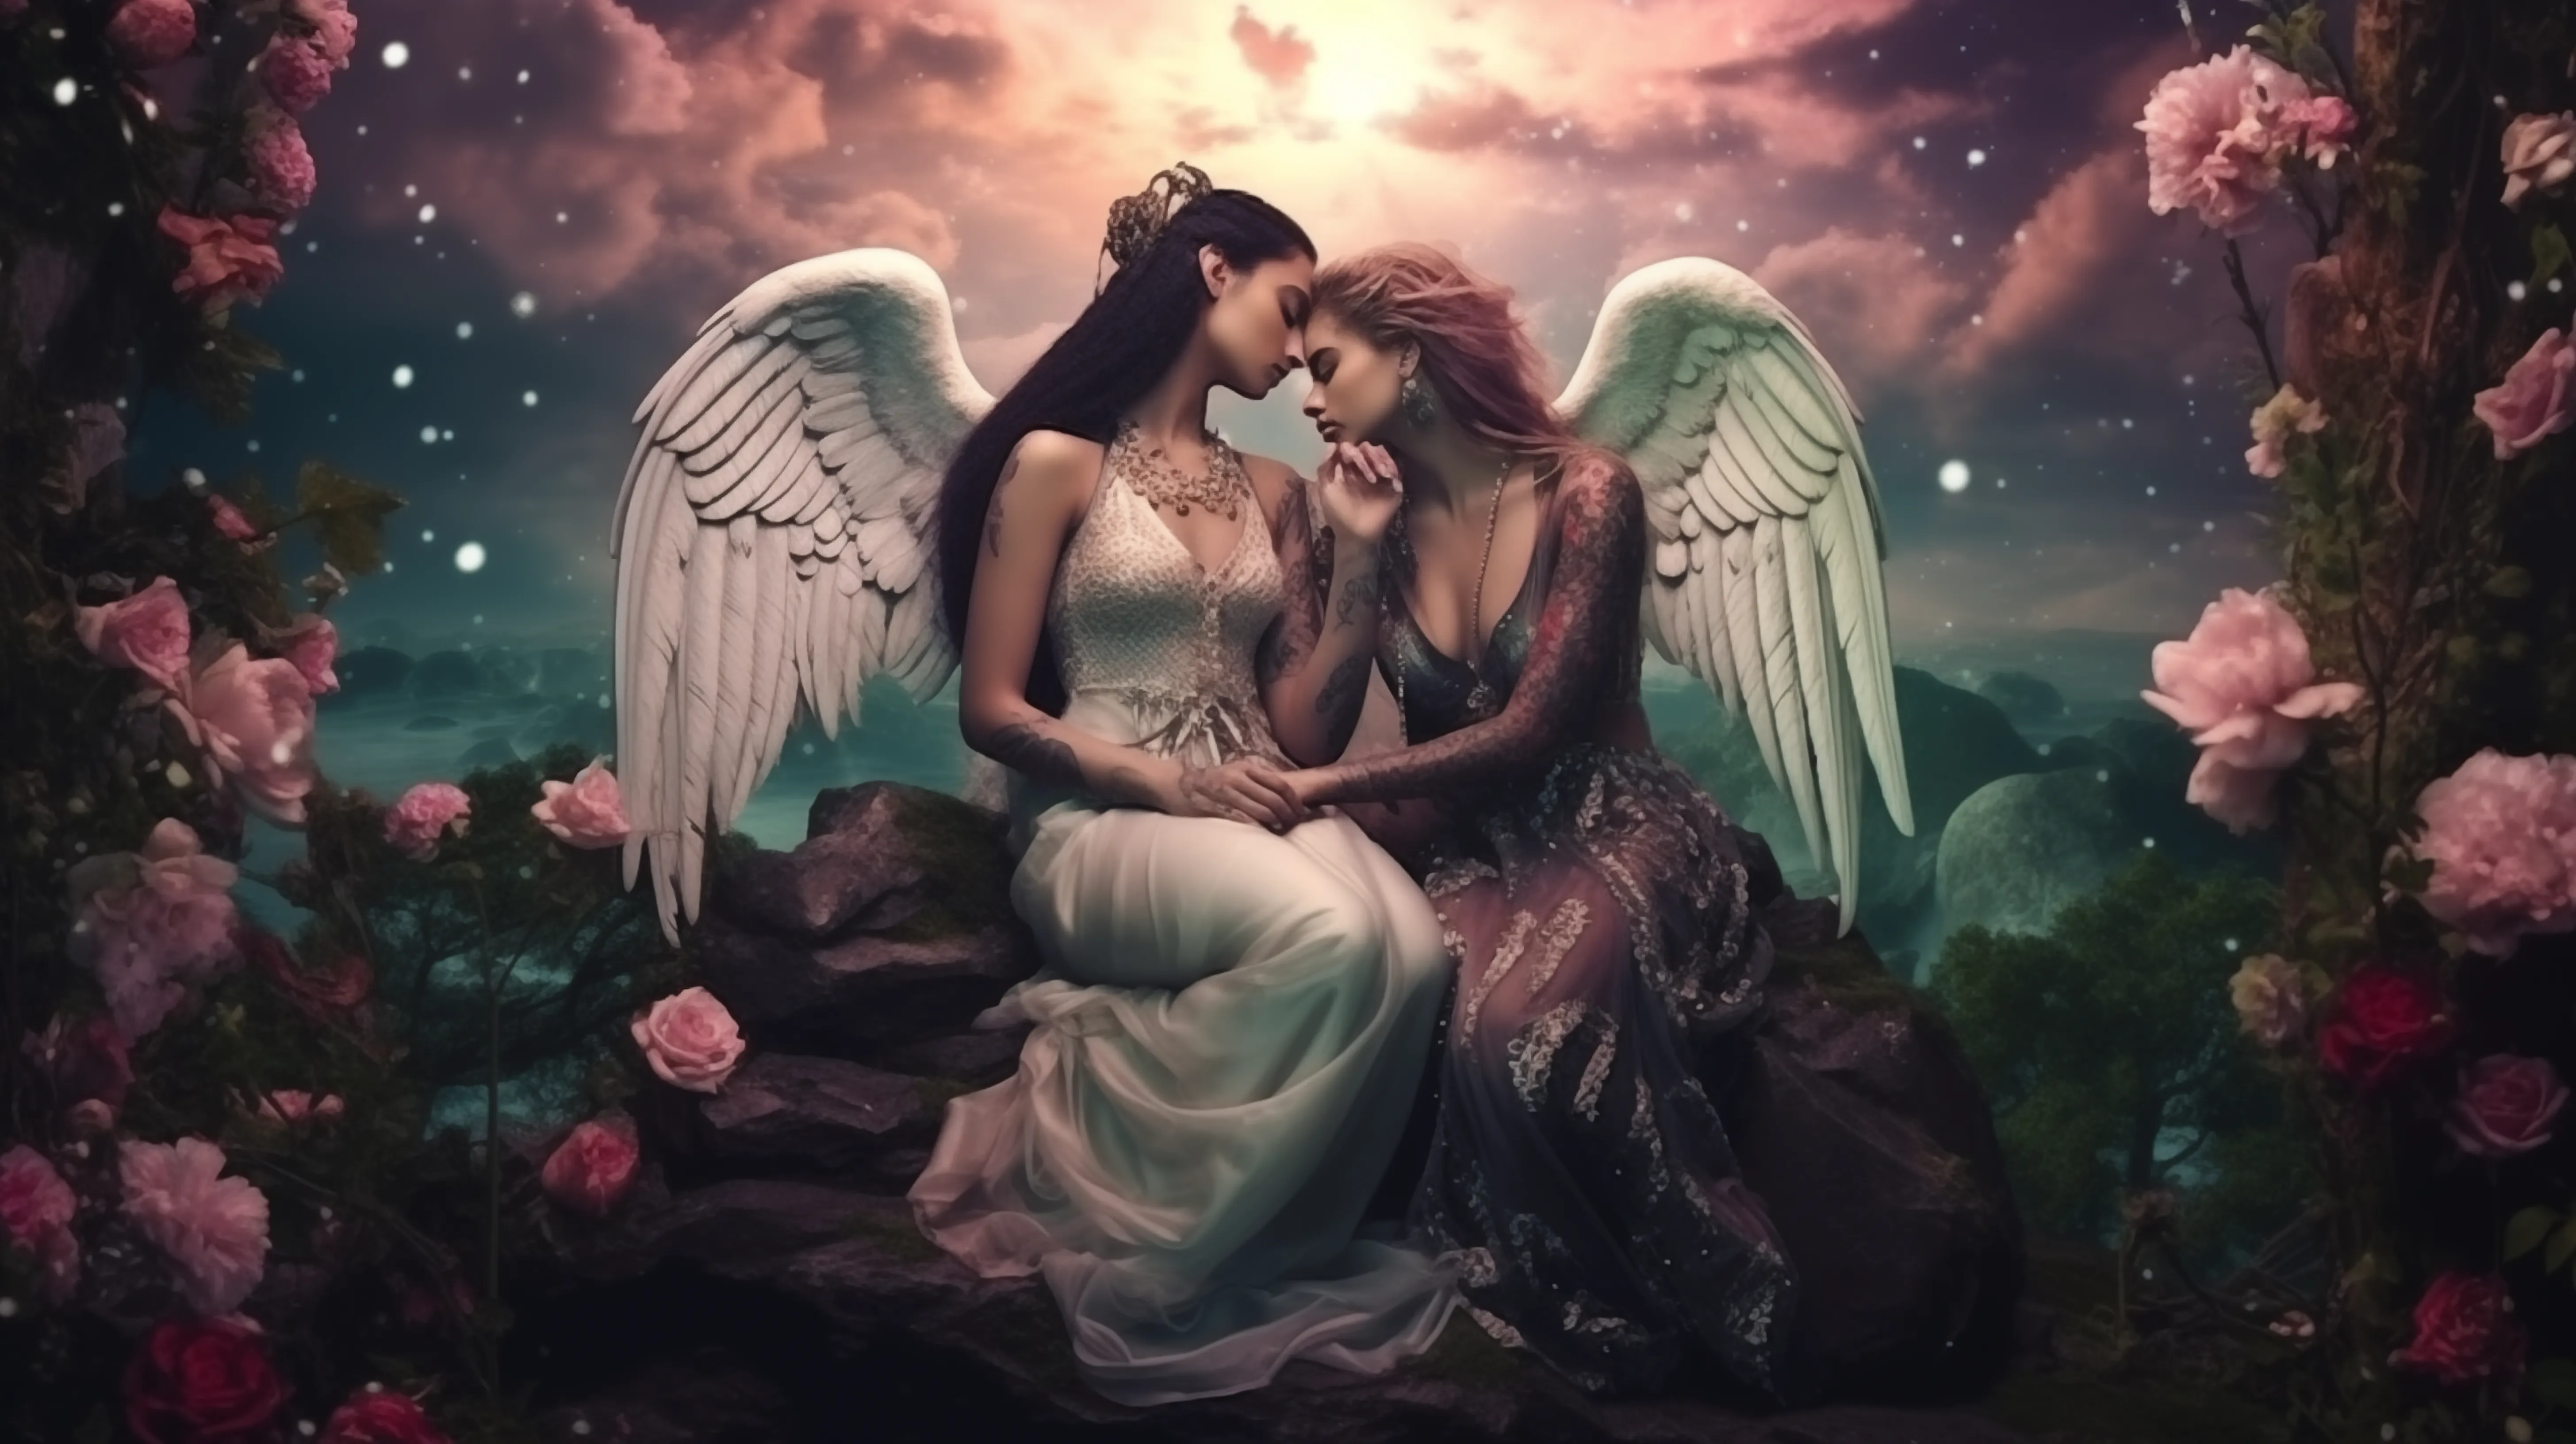 Two Gemini women with tattoos have angel wings and are in love representing the tarot card The Lovers.